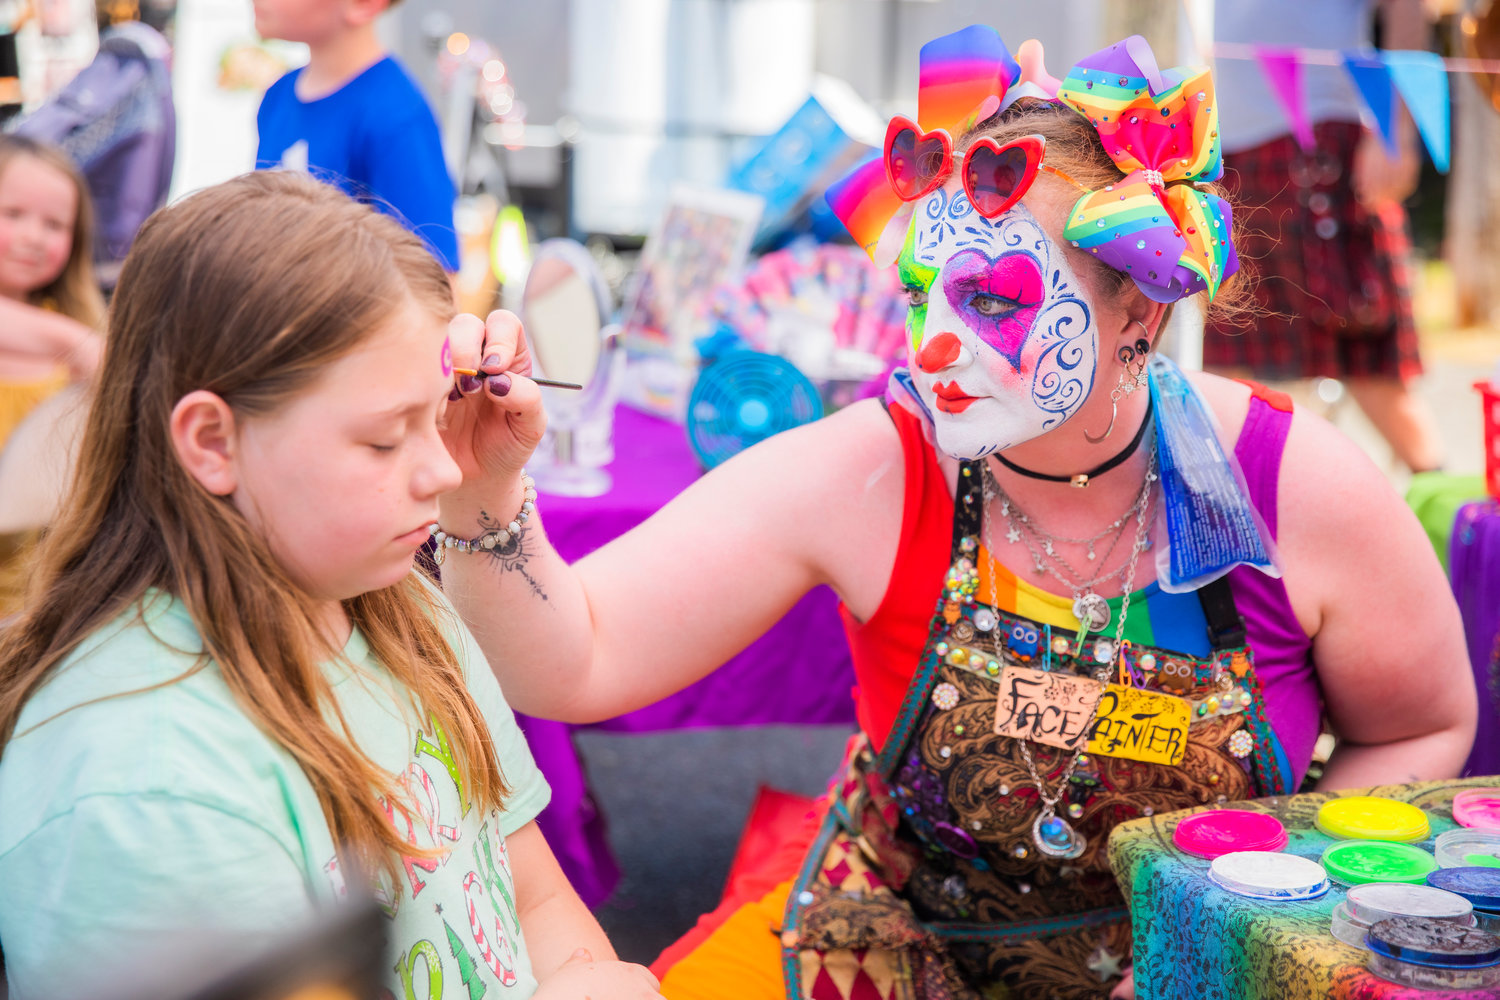 Anabelle Thomas, 9, receives artwork from Ann McRann at a table offering face painting Saturday during Chehalis Fest.